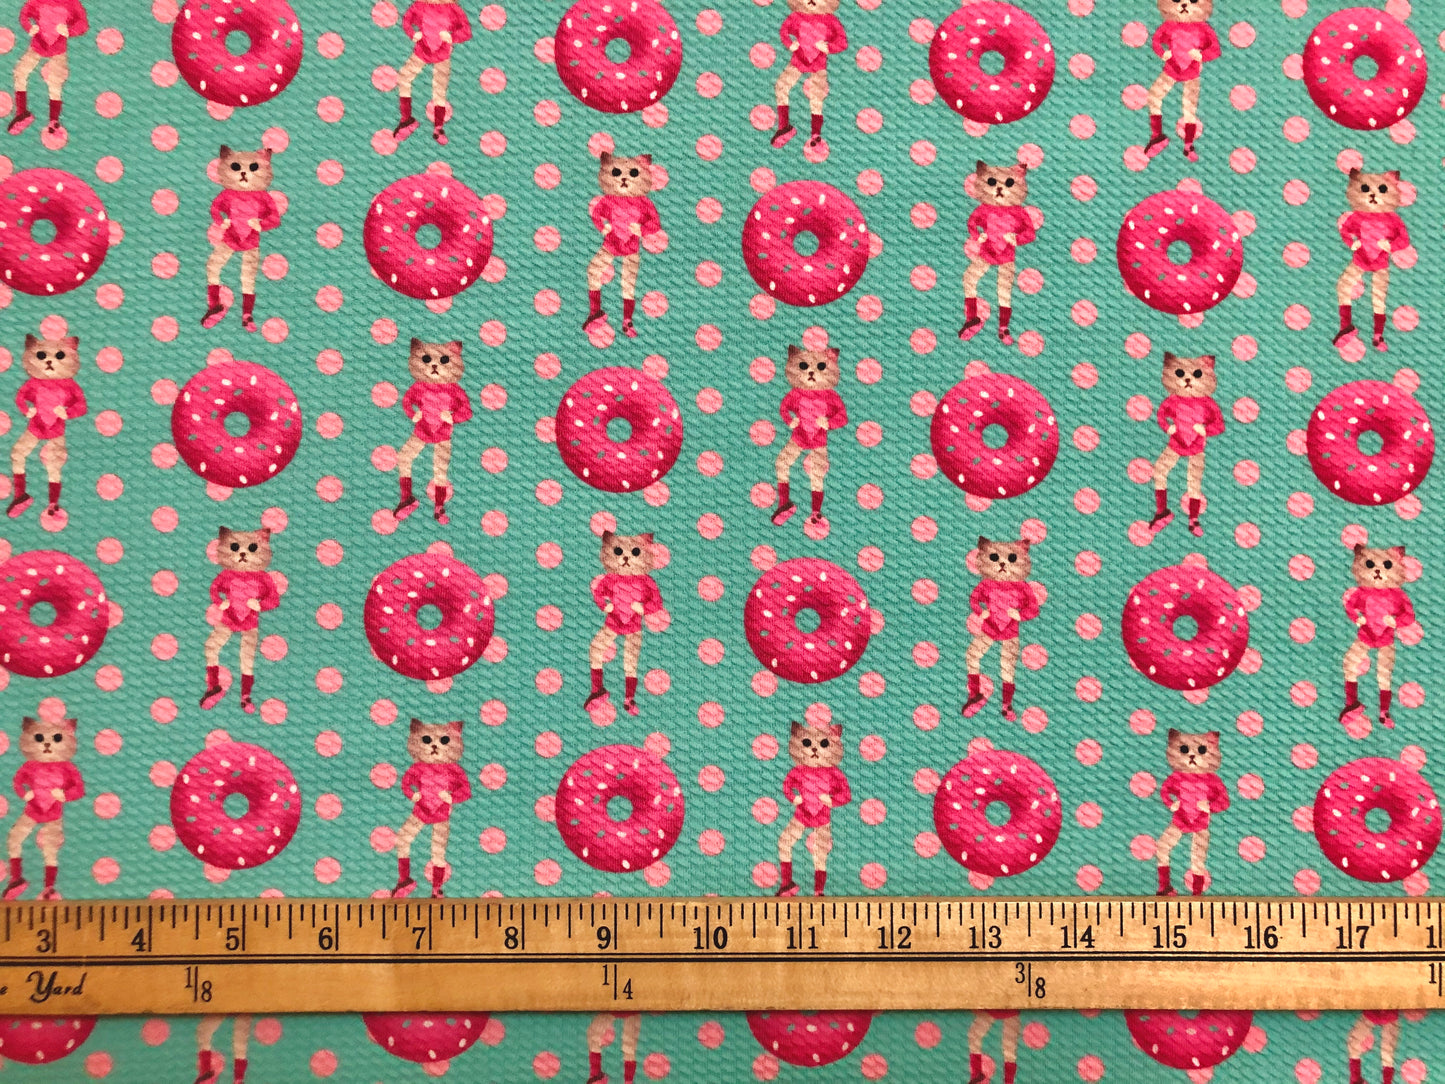 Bullet Knit Printed Fabric-Mint Fuchsia Donut Polka Dots-BPR176-Sold by the Yard-Bulk Available